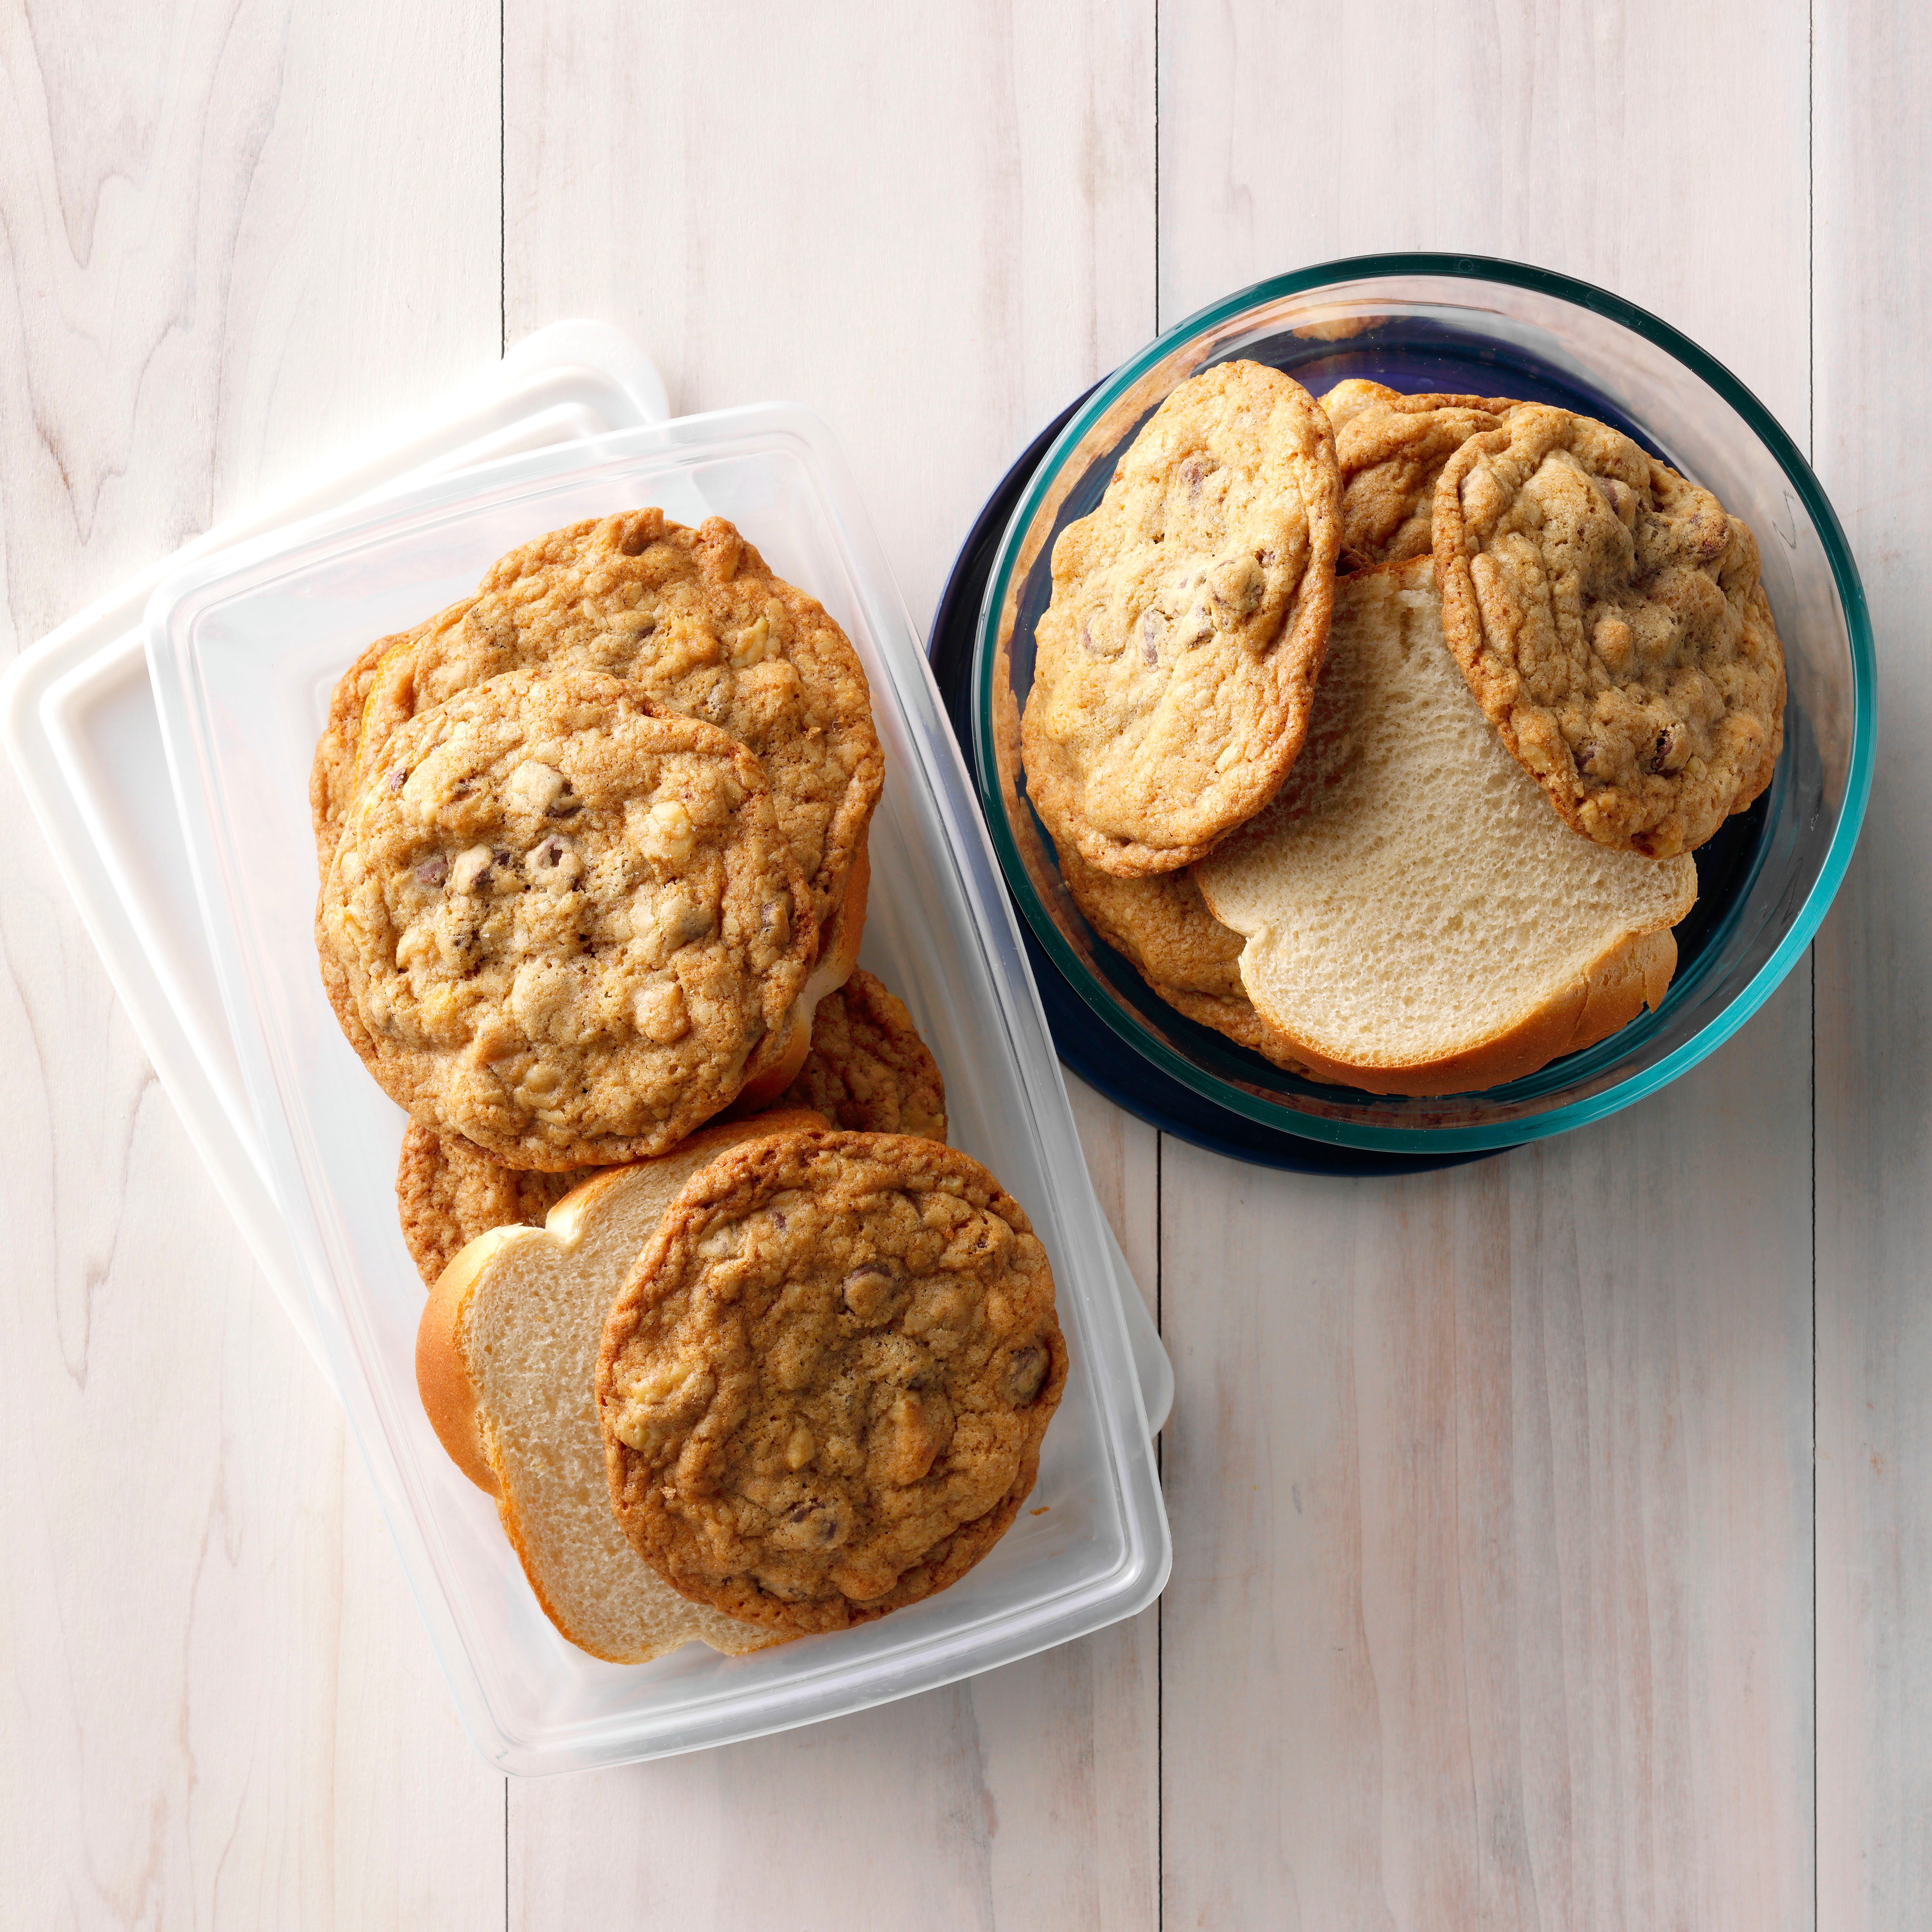 https://www.tasteofhome.com/wp-content/uploads/2019/06/White-Bread-Slices-in-Cookie-Container.jpg